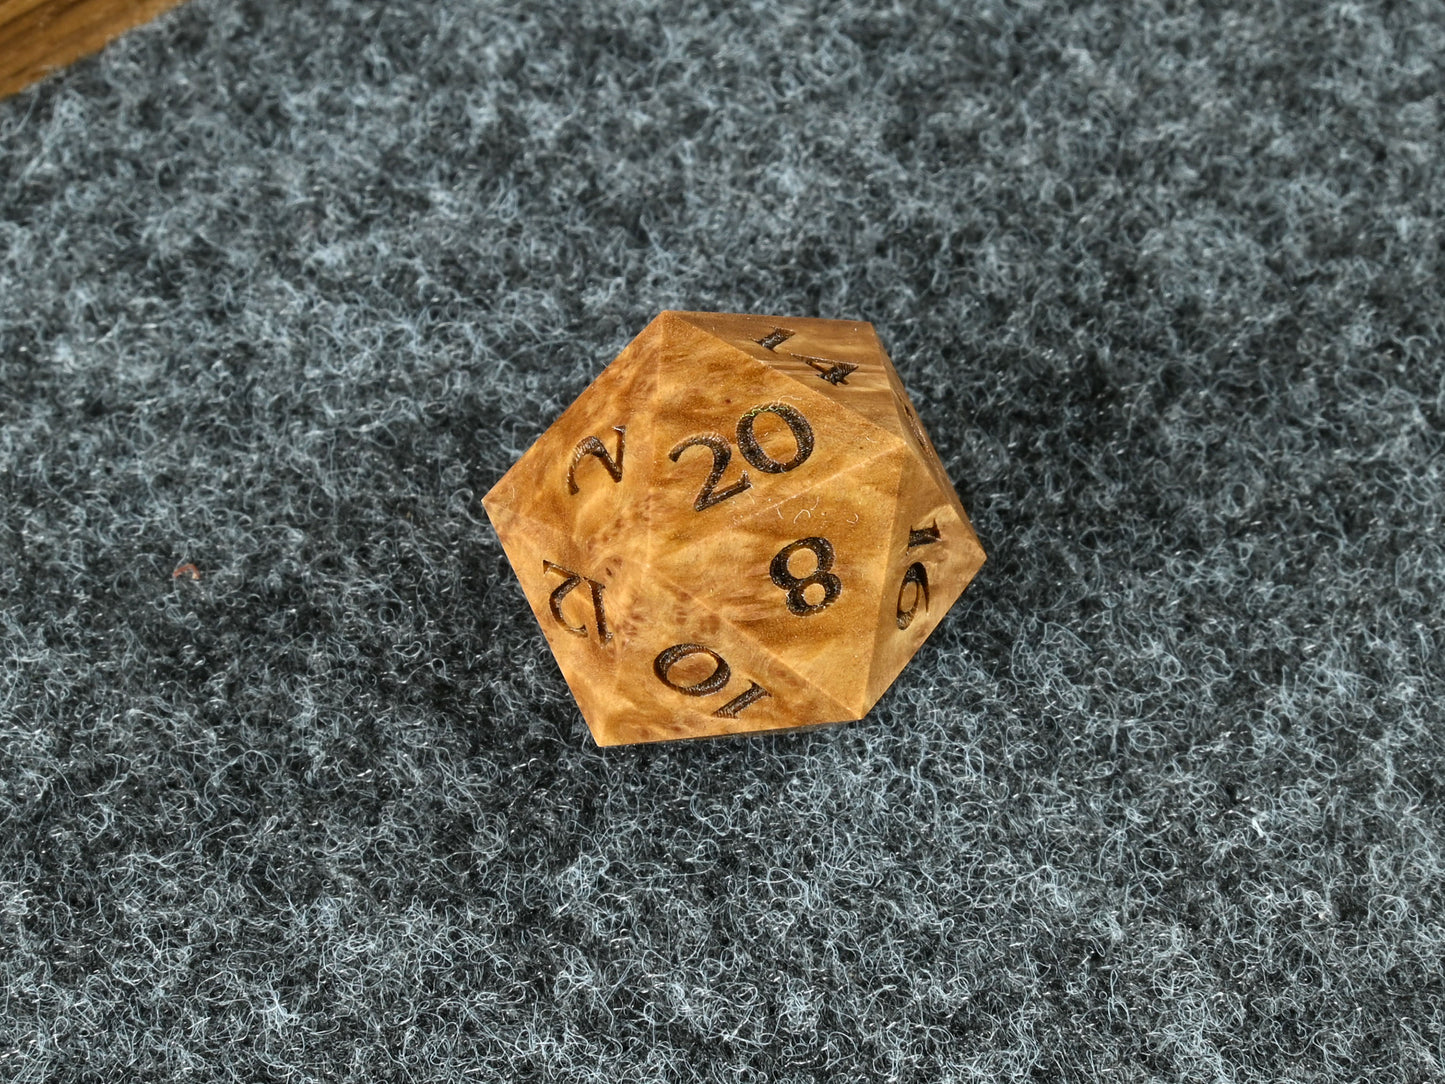 Brown Mallee Burl wood d20 for dnd rpg